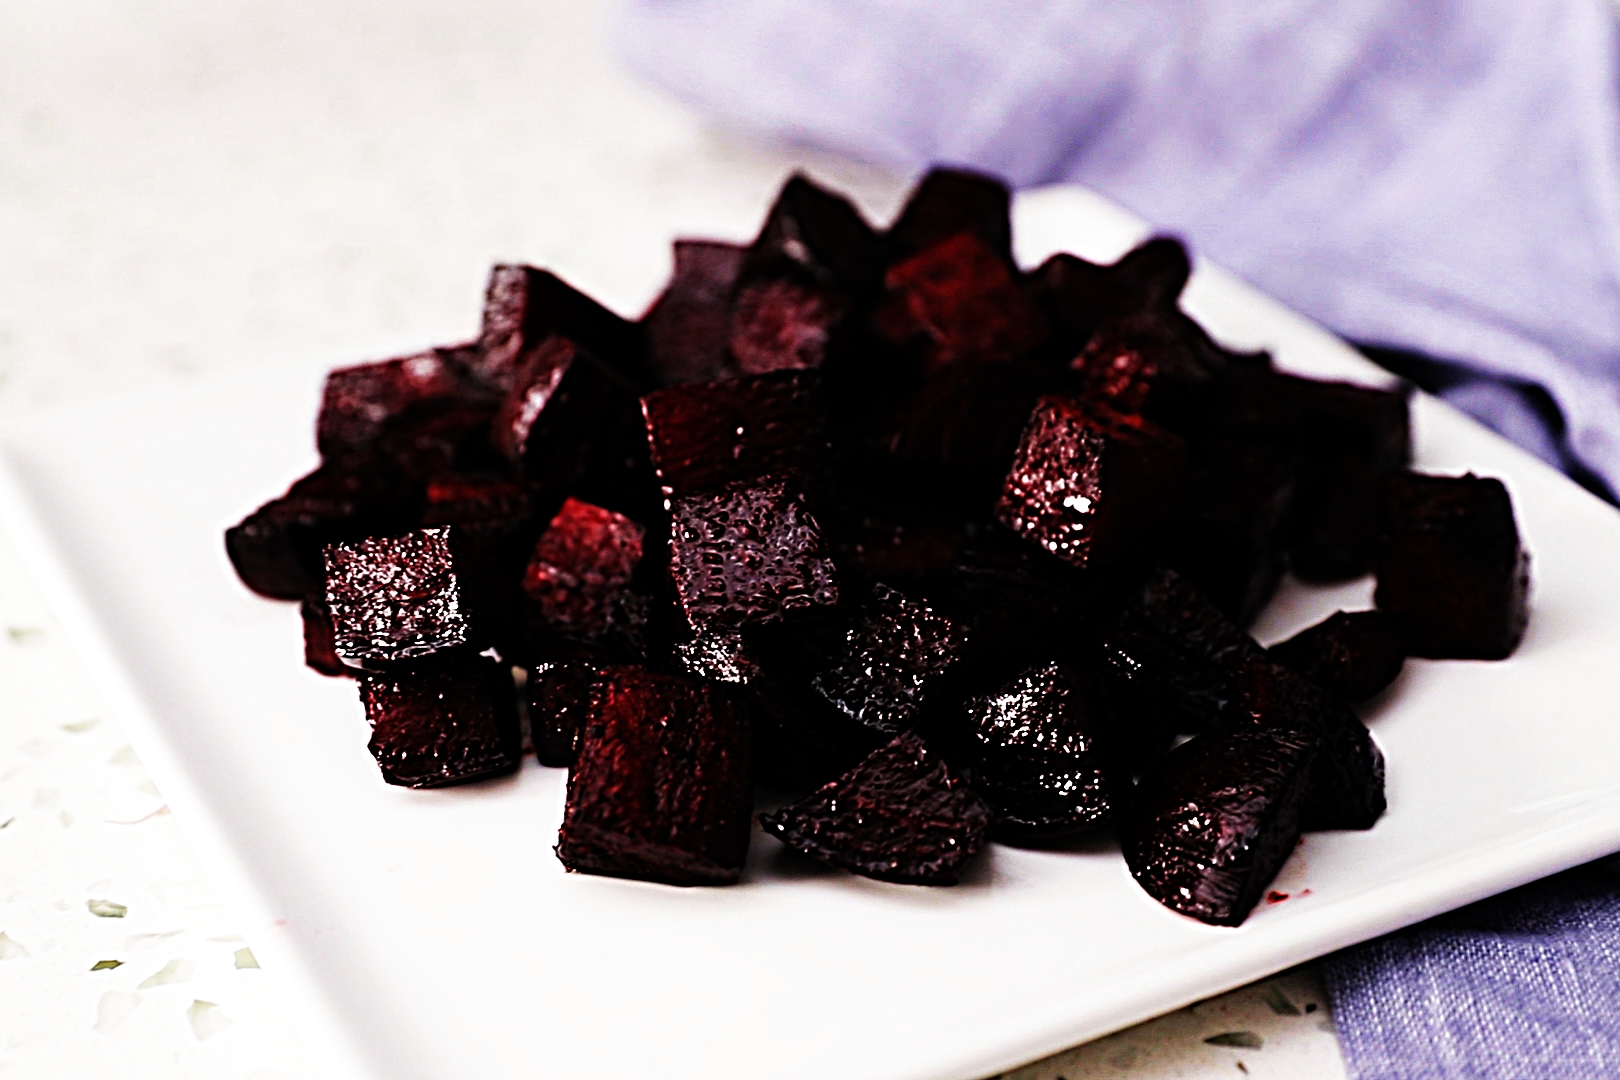 Stupid-Easy Recipe for Simple Roasted Beets (#1 Top-Rated)